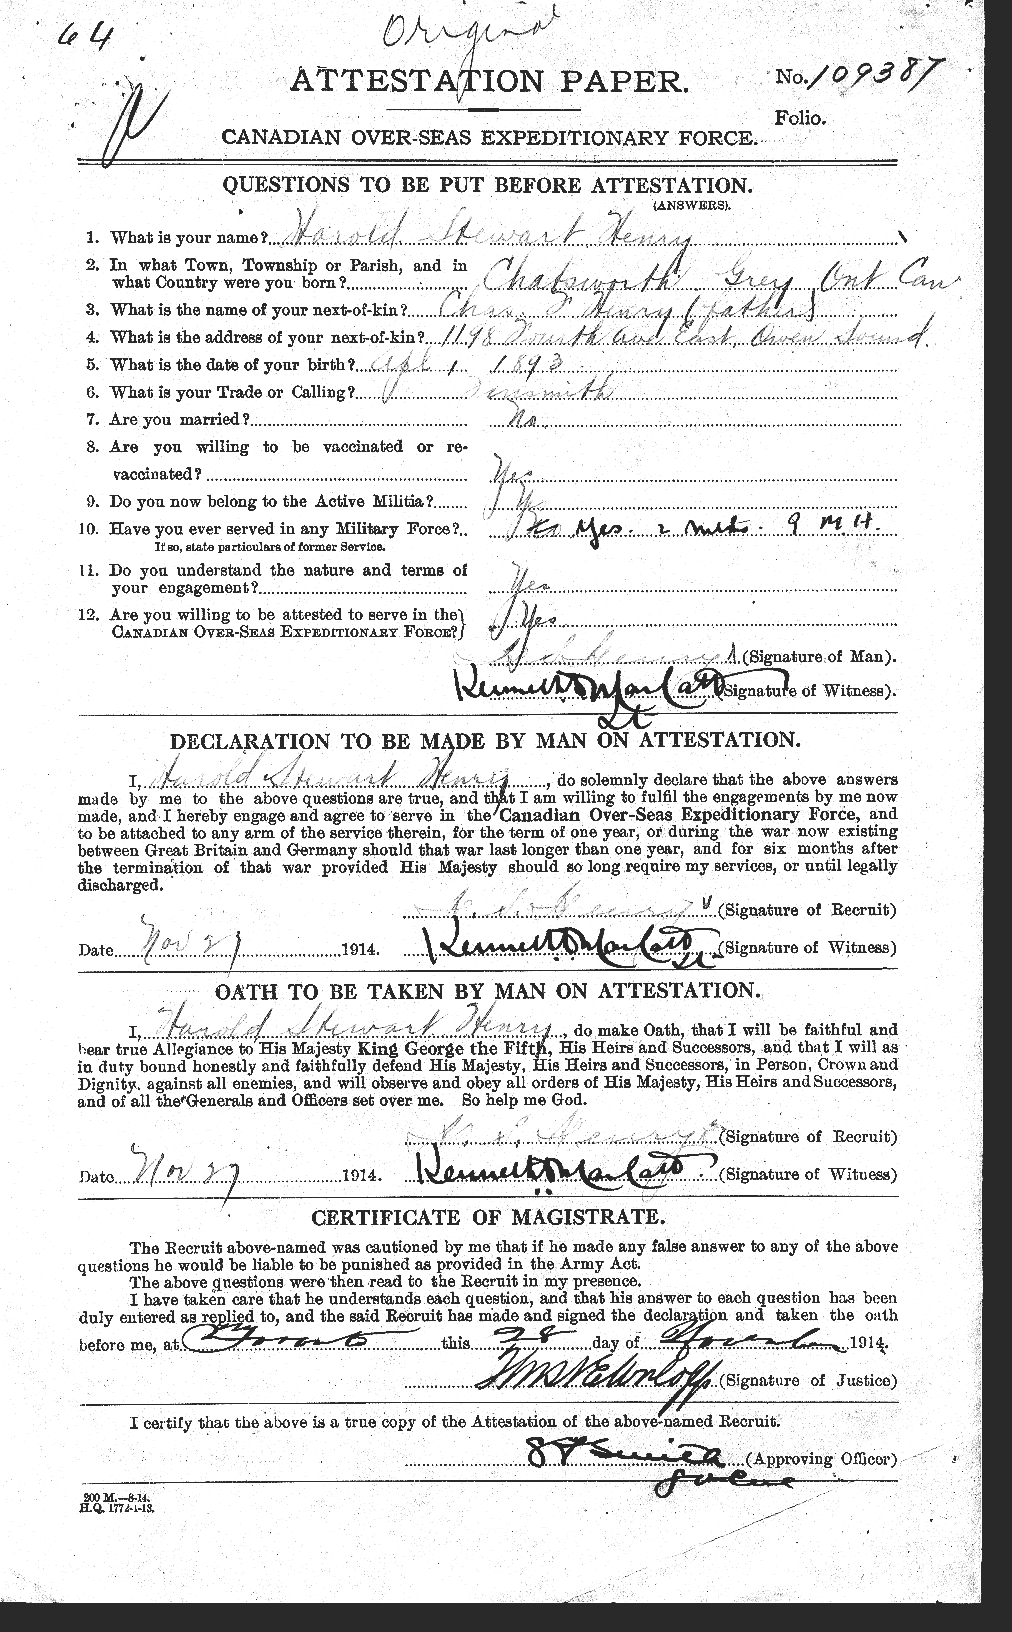 Personnel Records of the First World War - CEF 392887a